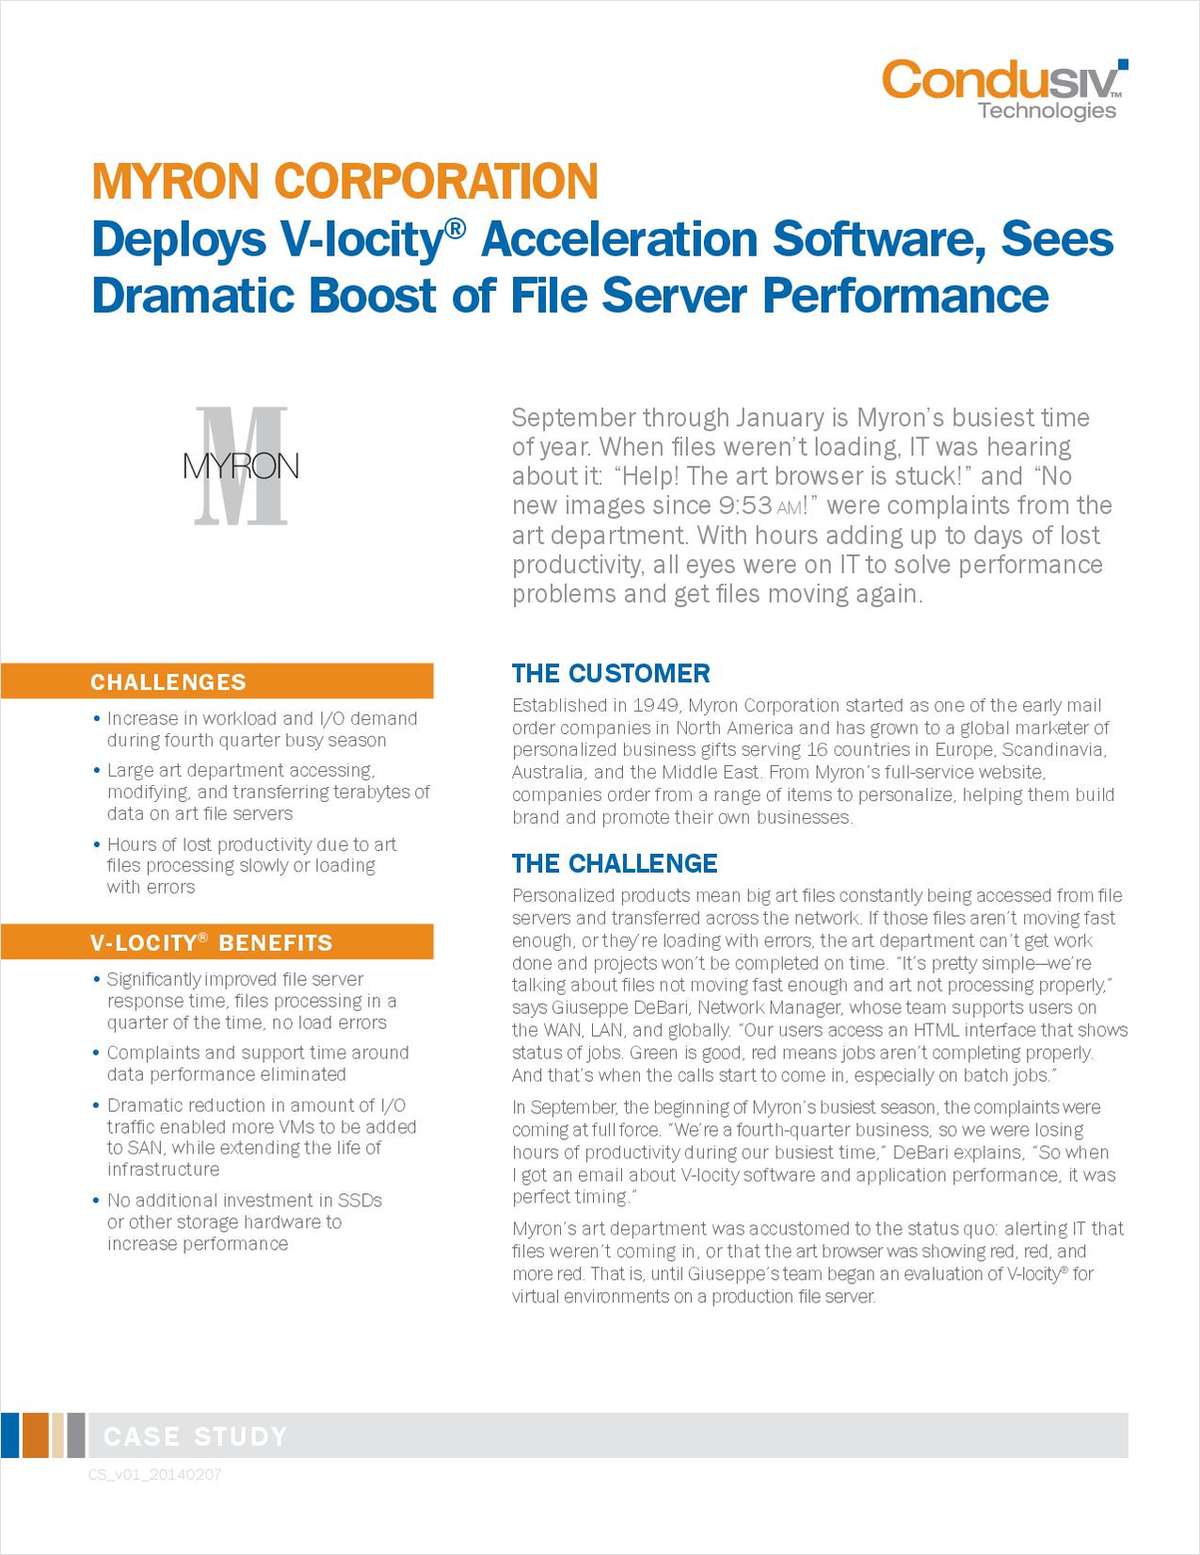 MYRON CORPORATION Deploys V-locity® I/O Reduction Software, Sees Dramatic Boost of File Server Performance